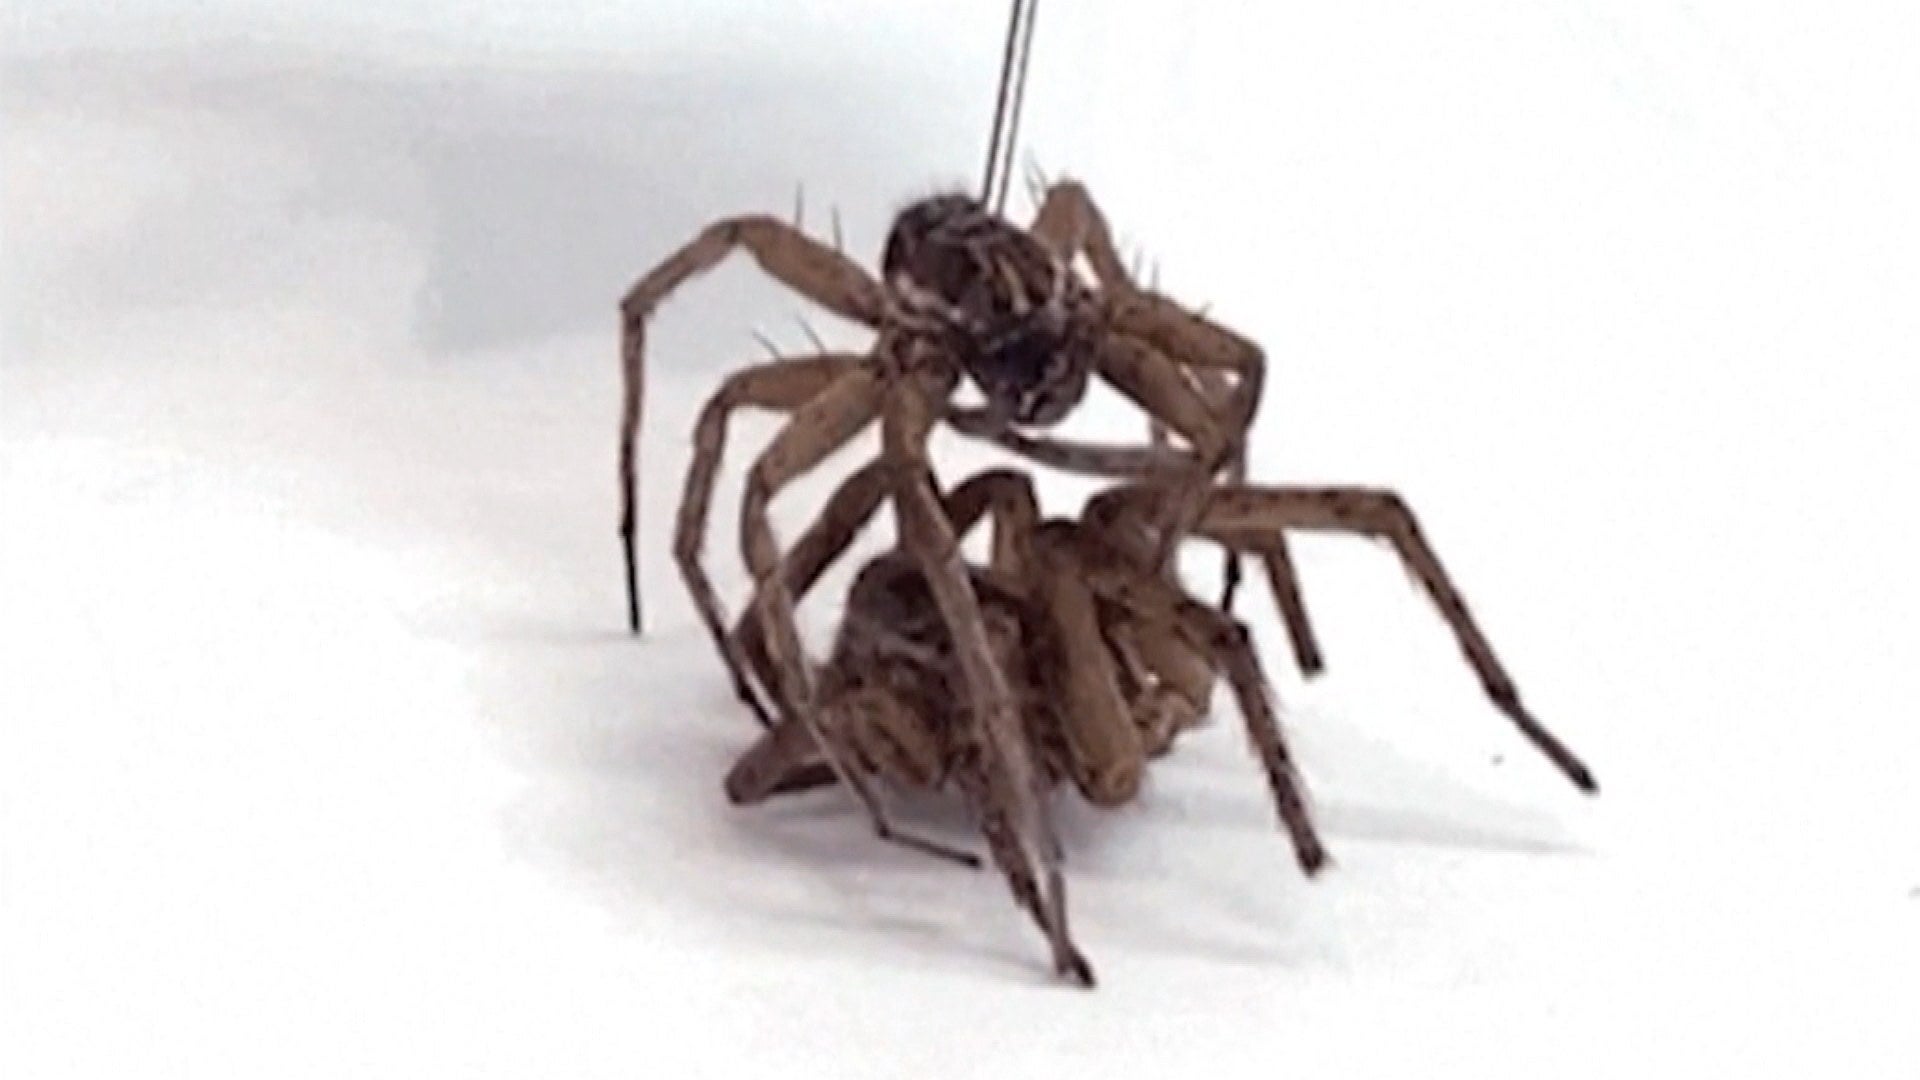 Engineers Discover That Dead Spiders Are Great at Gripping Things